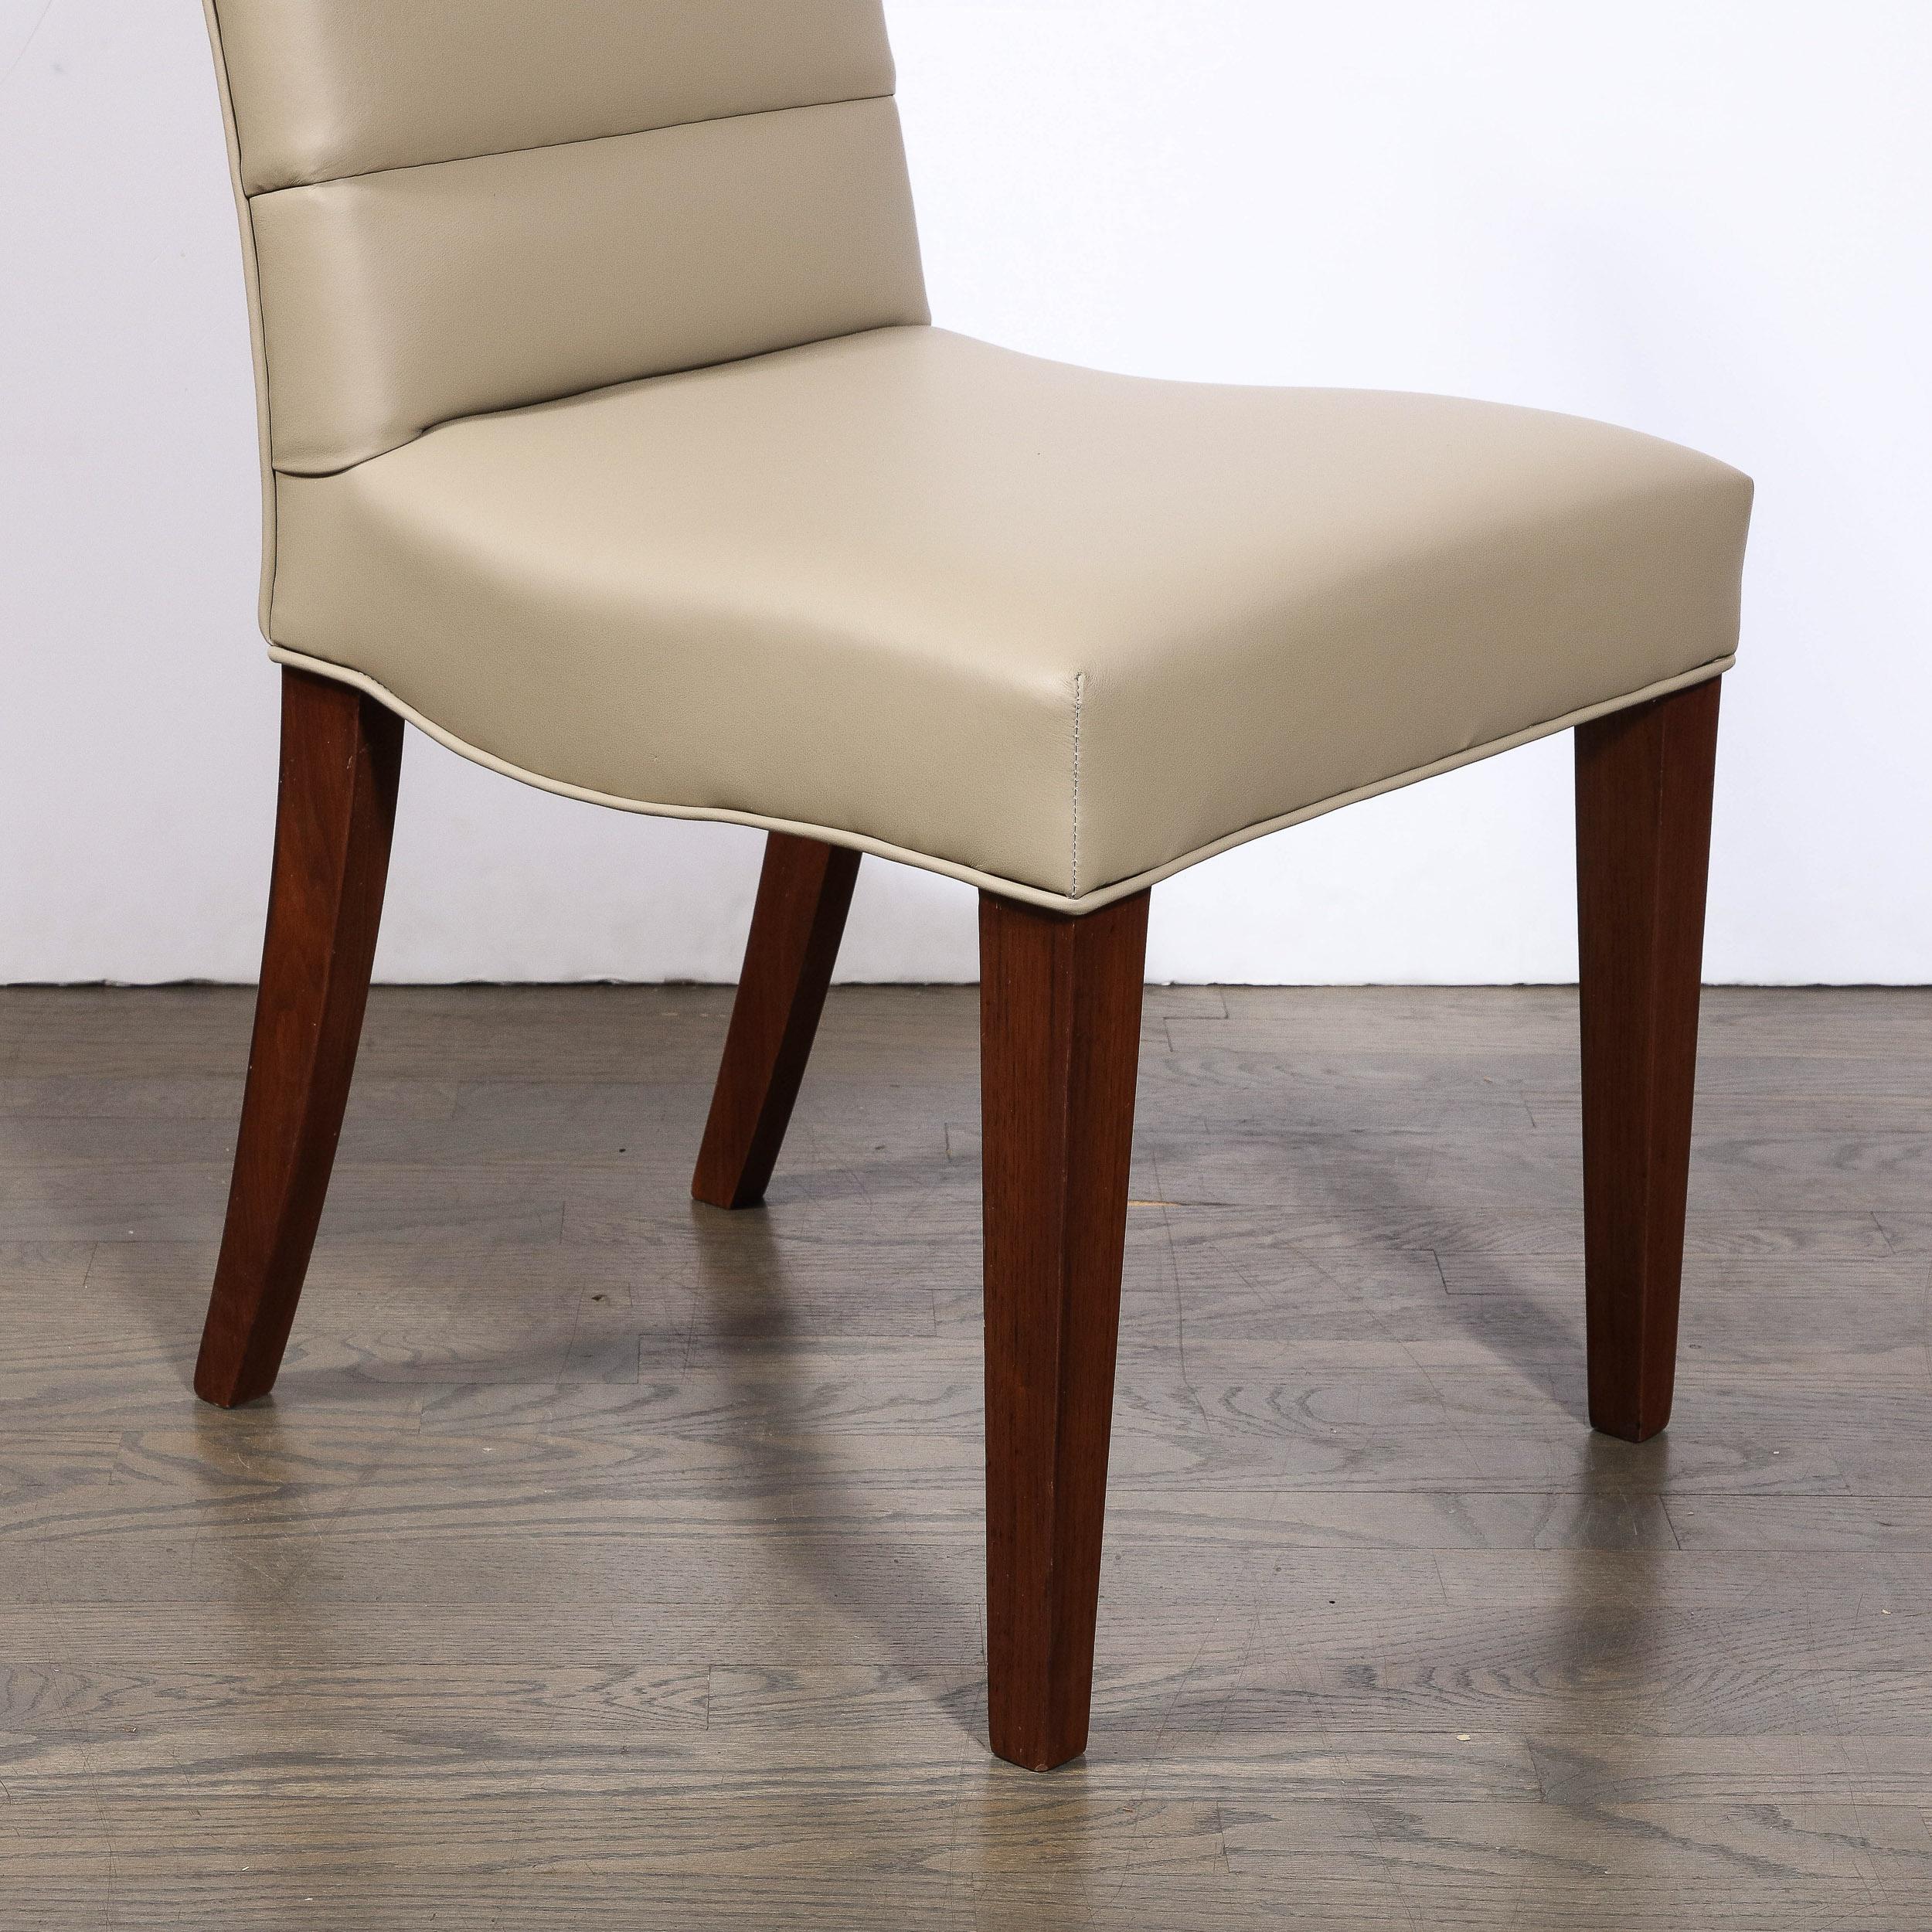 Art Deco Gilbert Rohde Chair in Holly Hunt Leather w/ Tufted Back & Walnut Legs For Sale 7